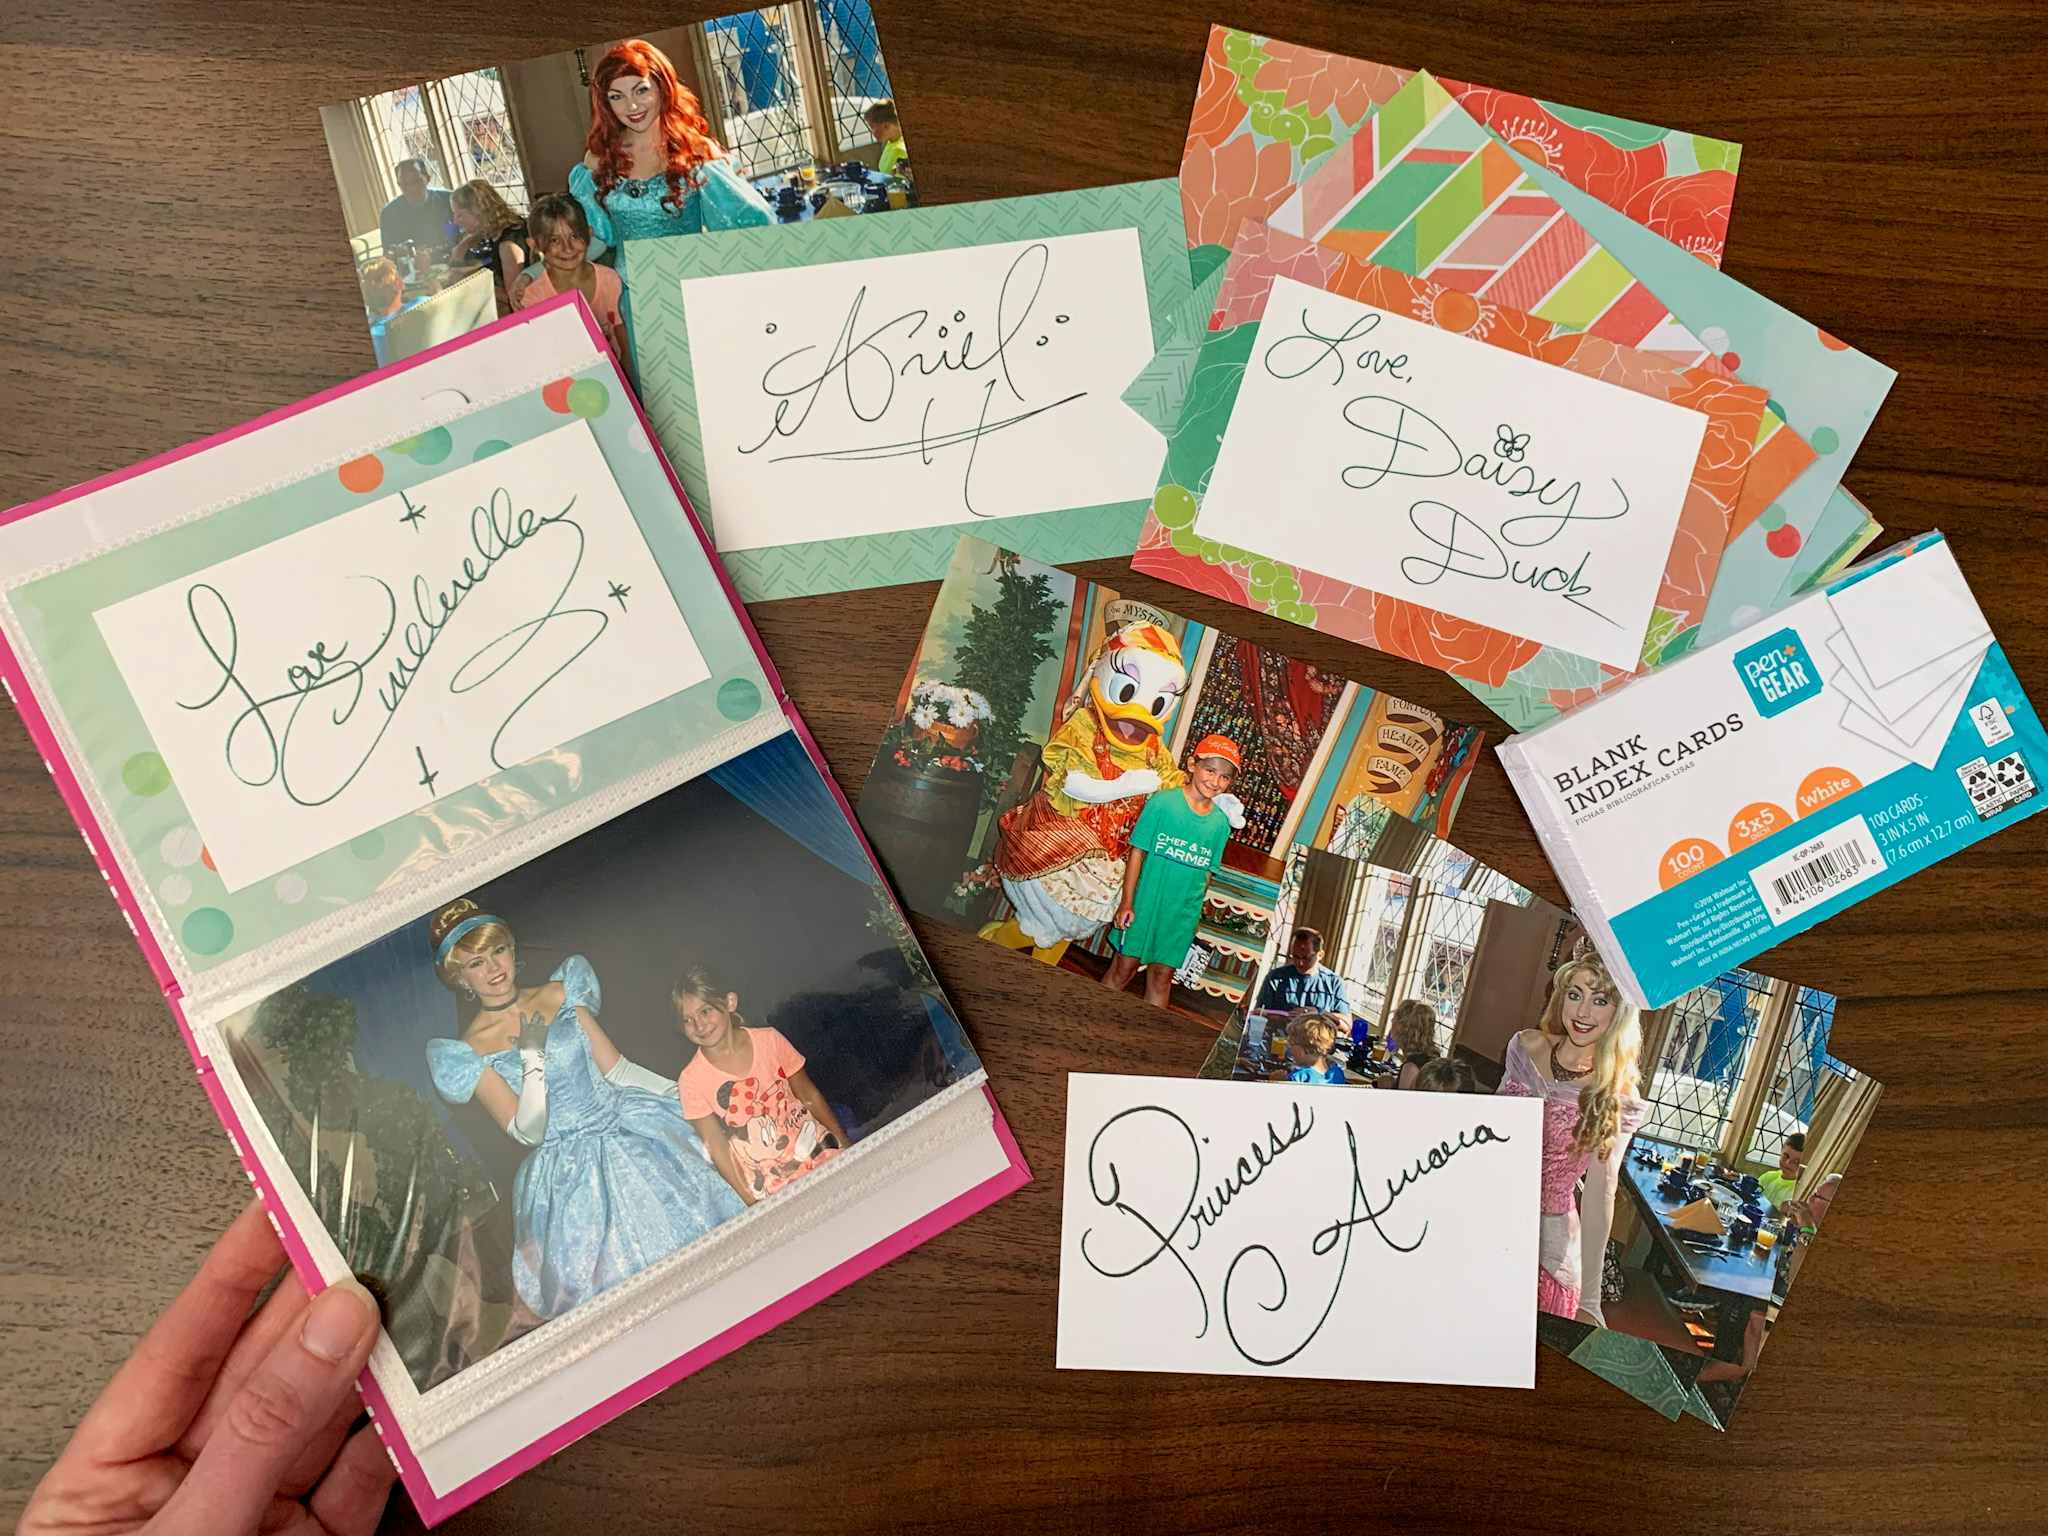 Disney Character photos and autographs assembled into a small dollar store photo album.